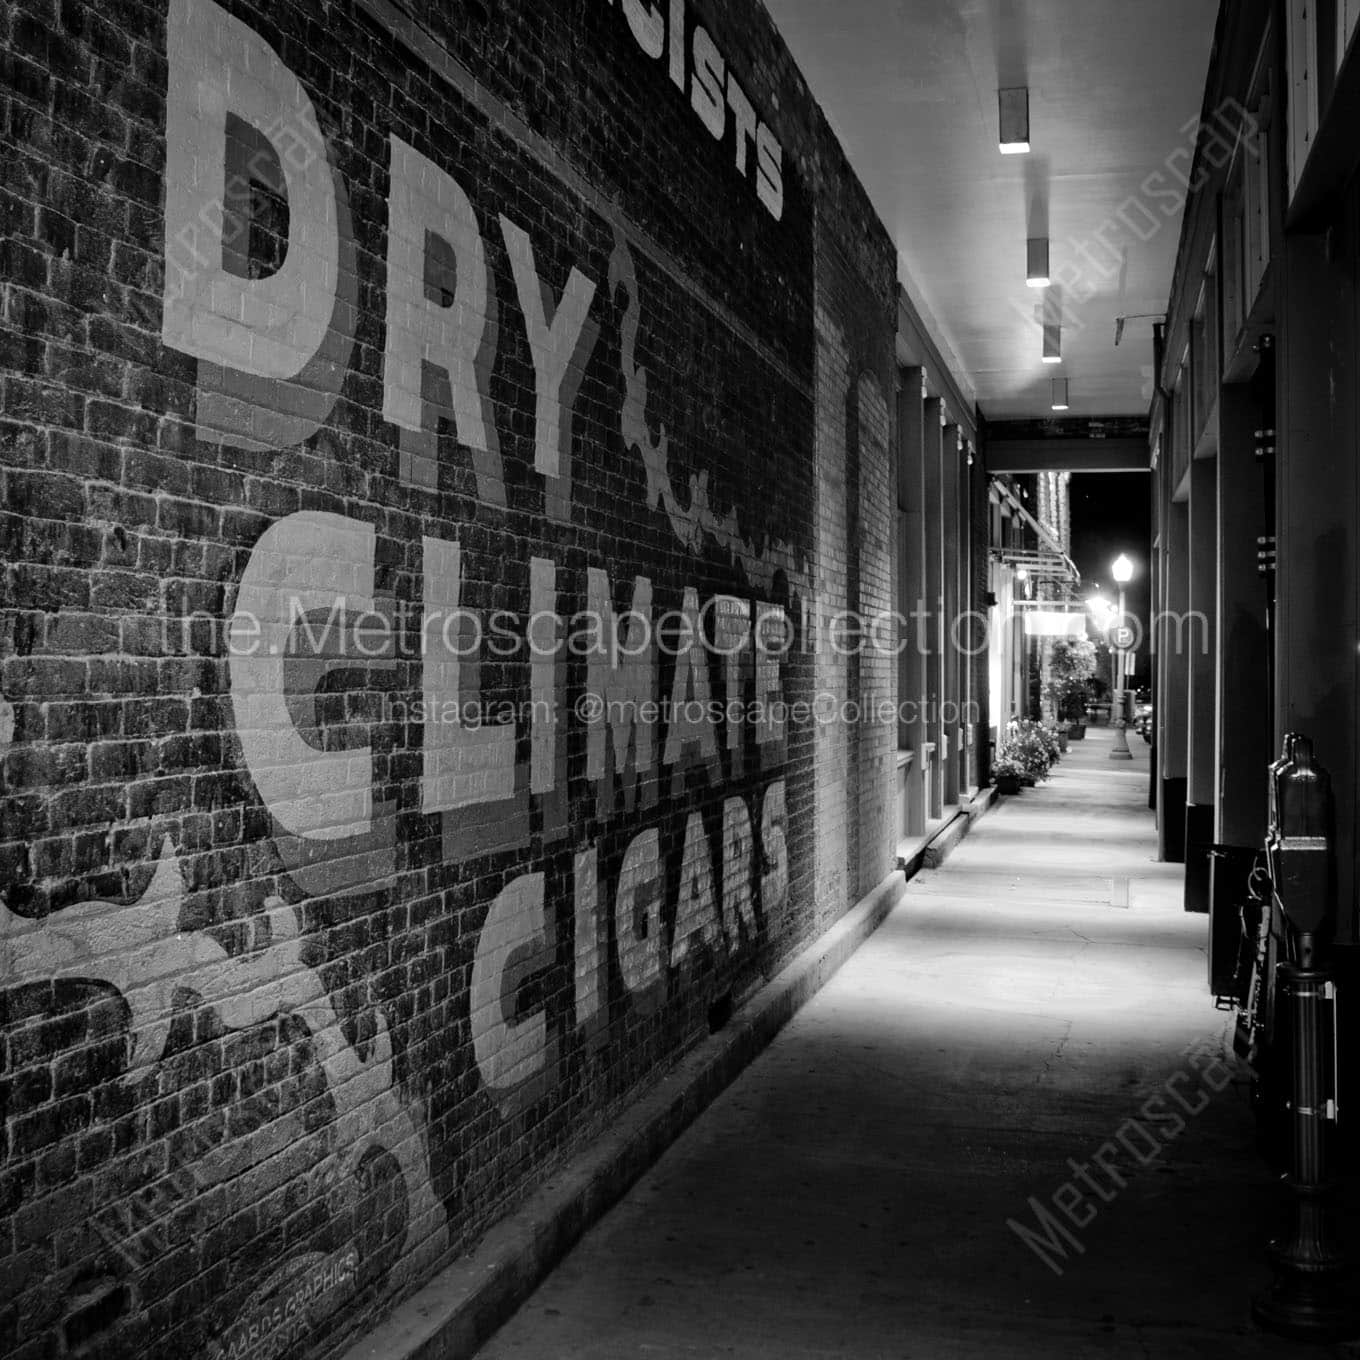 dry climate cigars wall mural downtown aspen Black & White Office Art